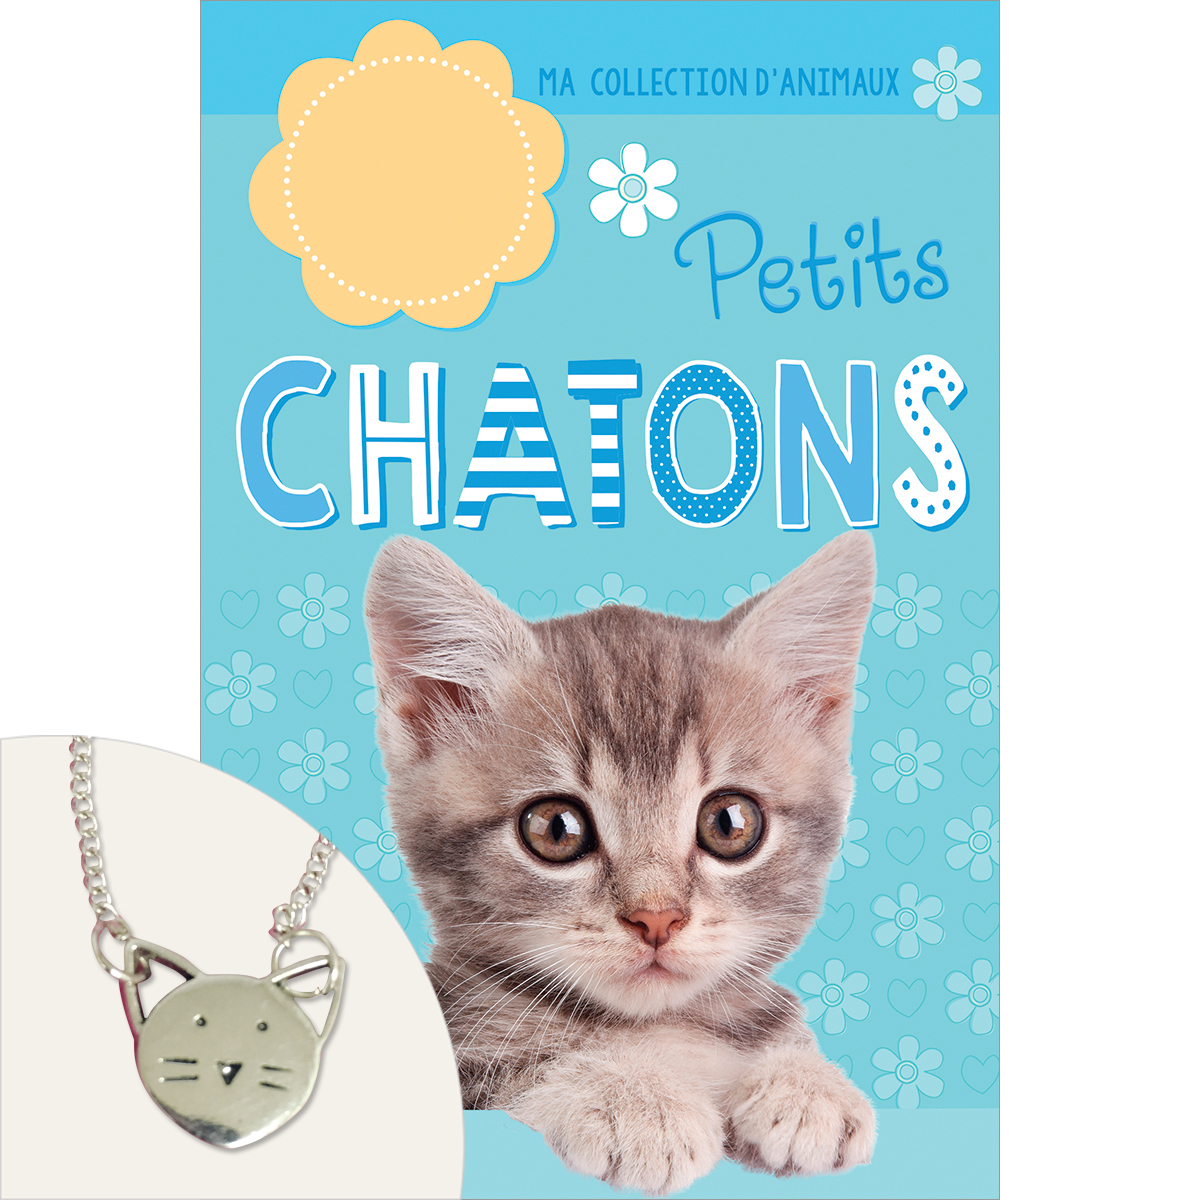  Ma collection d'animaux : Petits chatons 